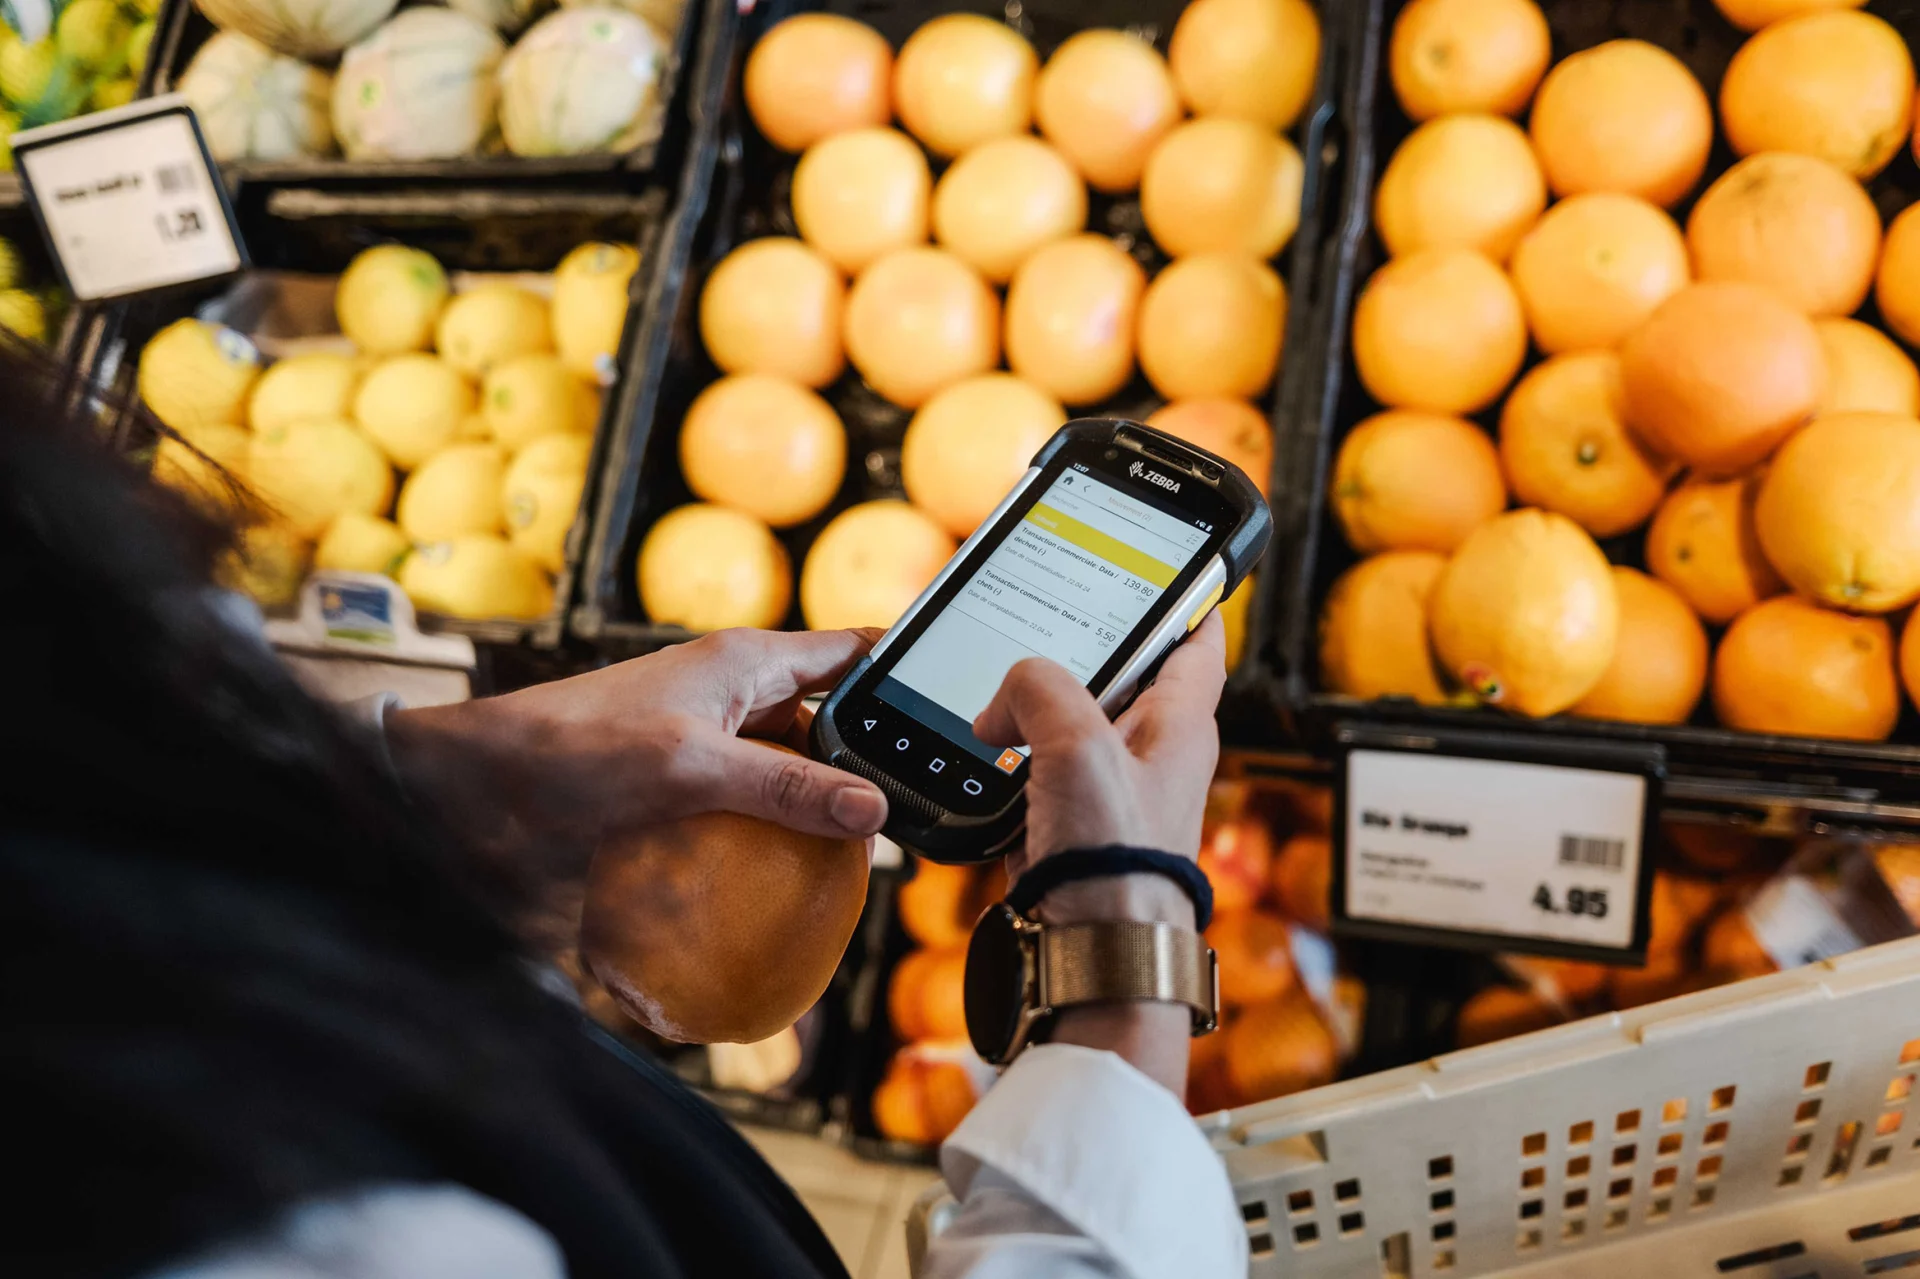 The store manager manages products on a mobile device